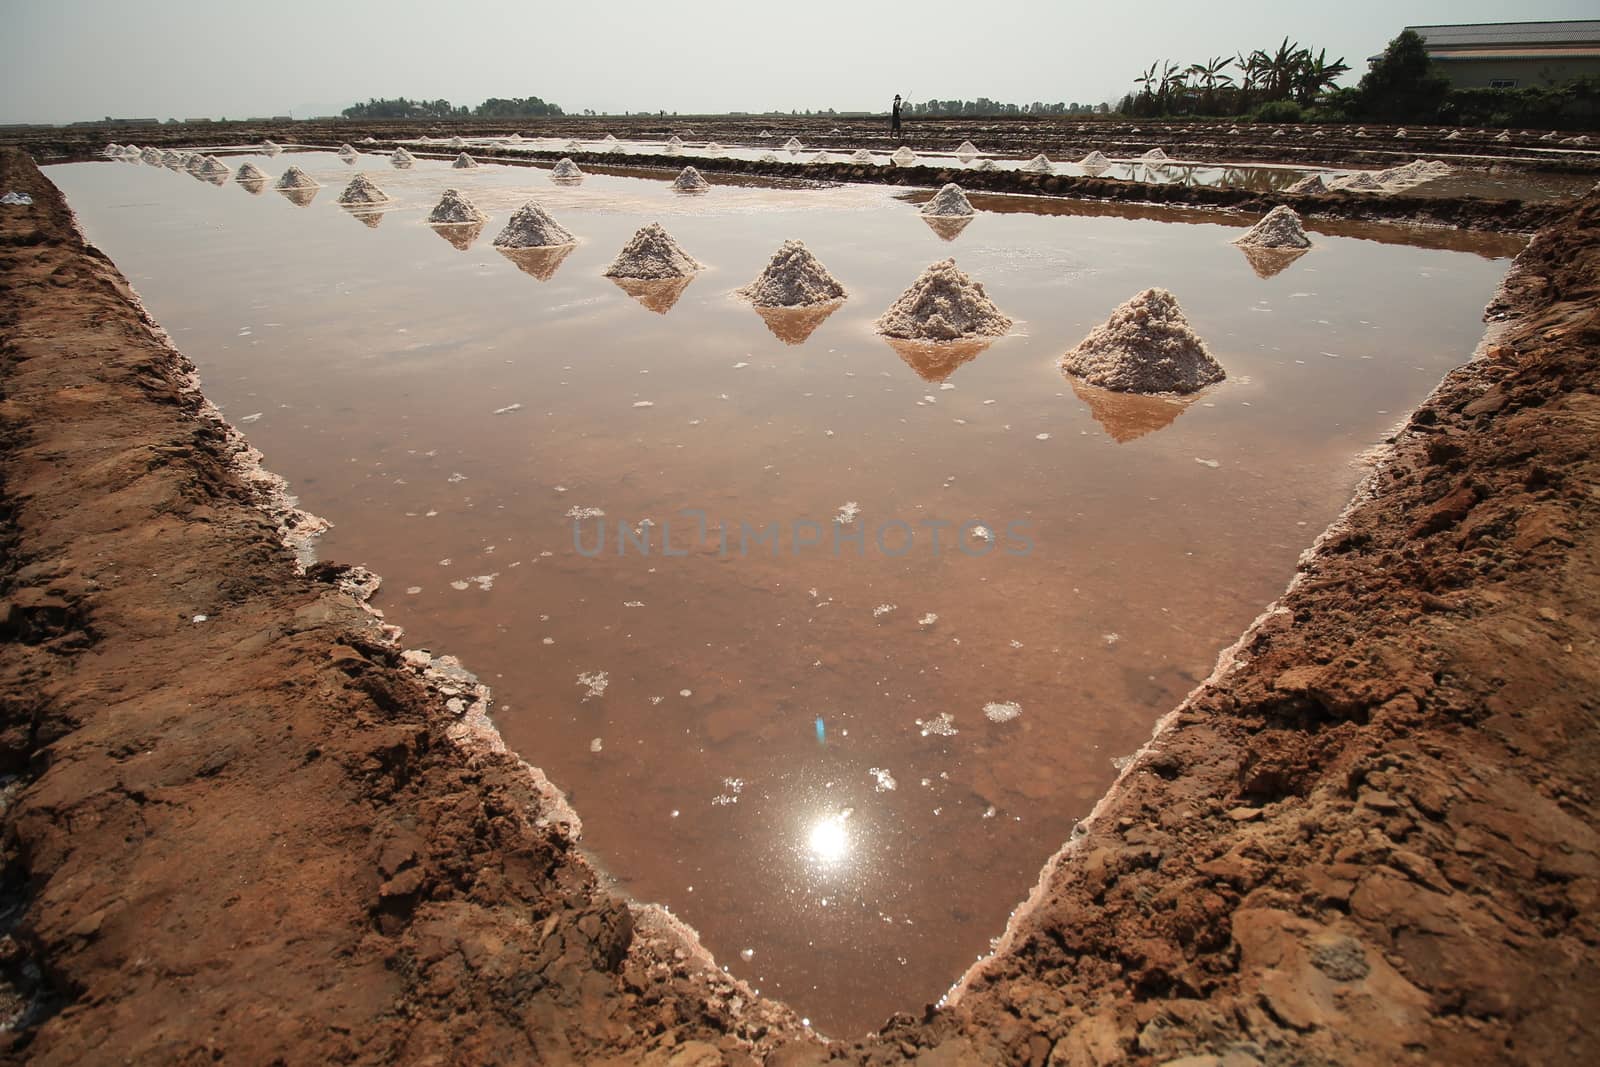 Wide angle view the salt fields of Kampot Province during the harvest season which is a traditional and cultural local livelihood for the Khmer people of Cambodia